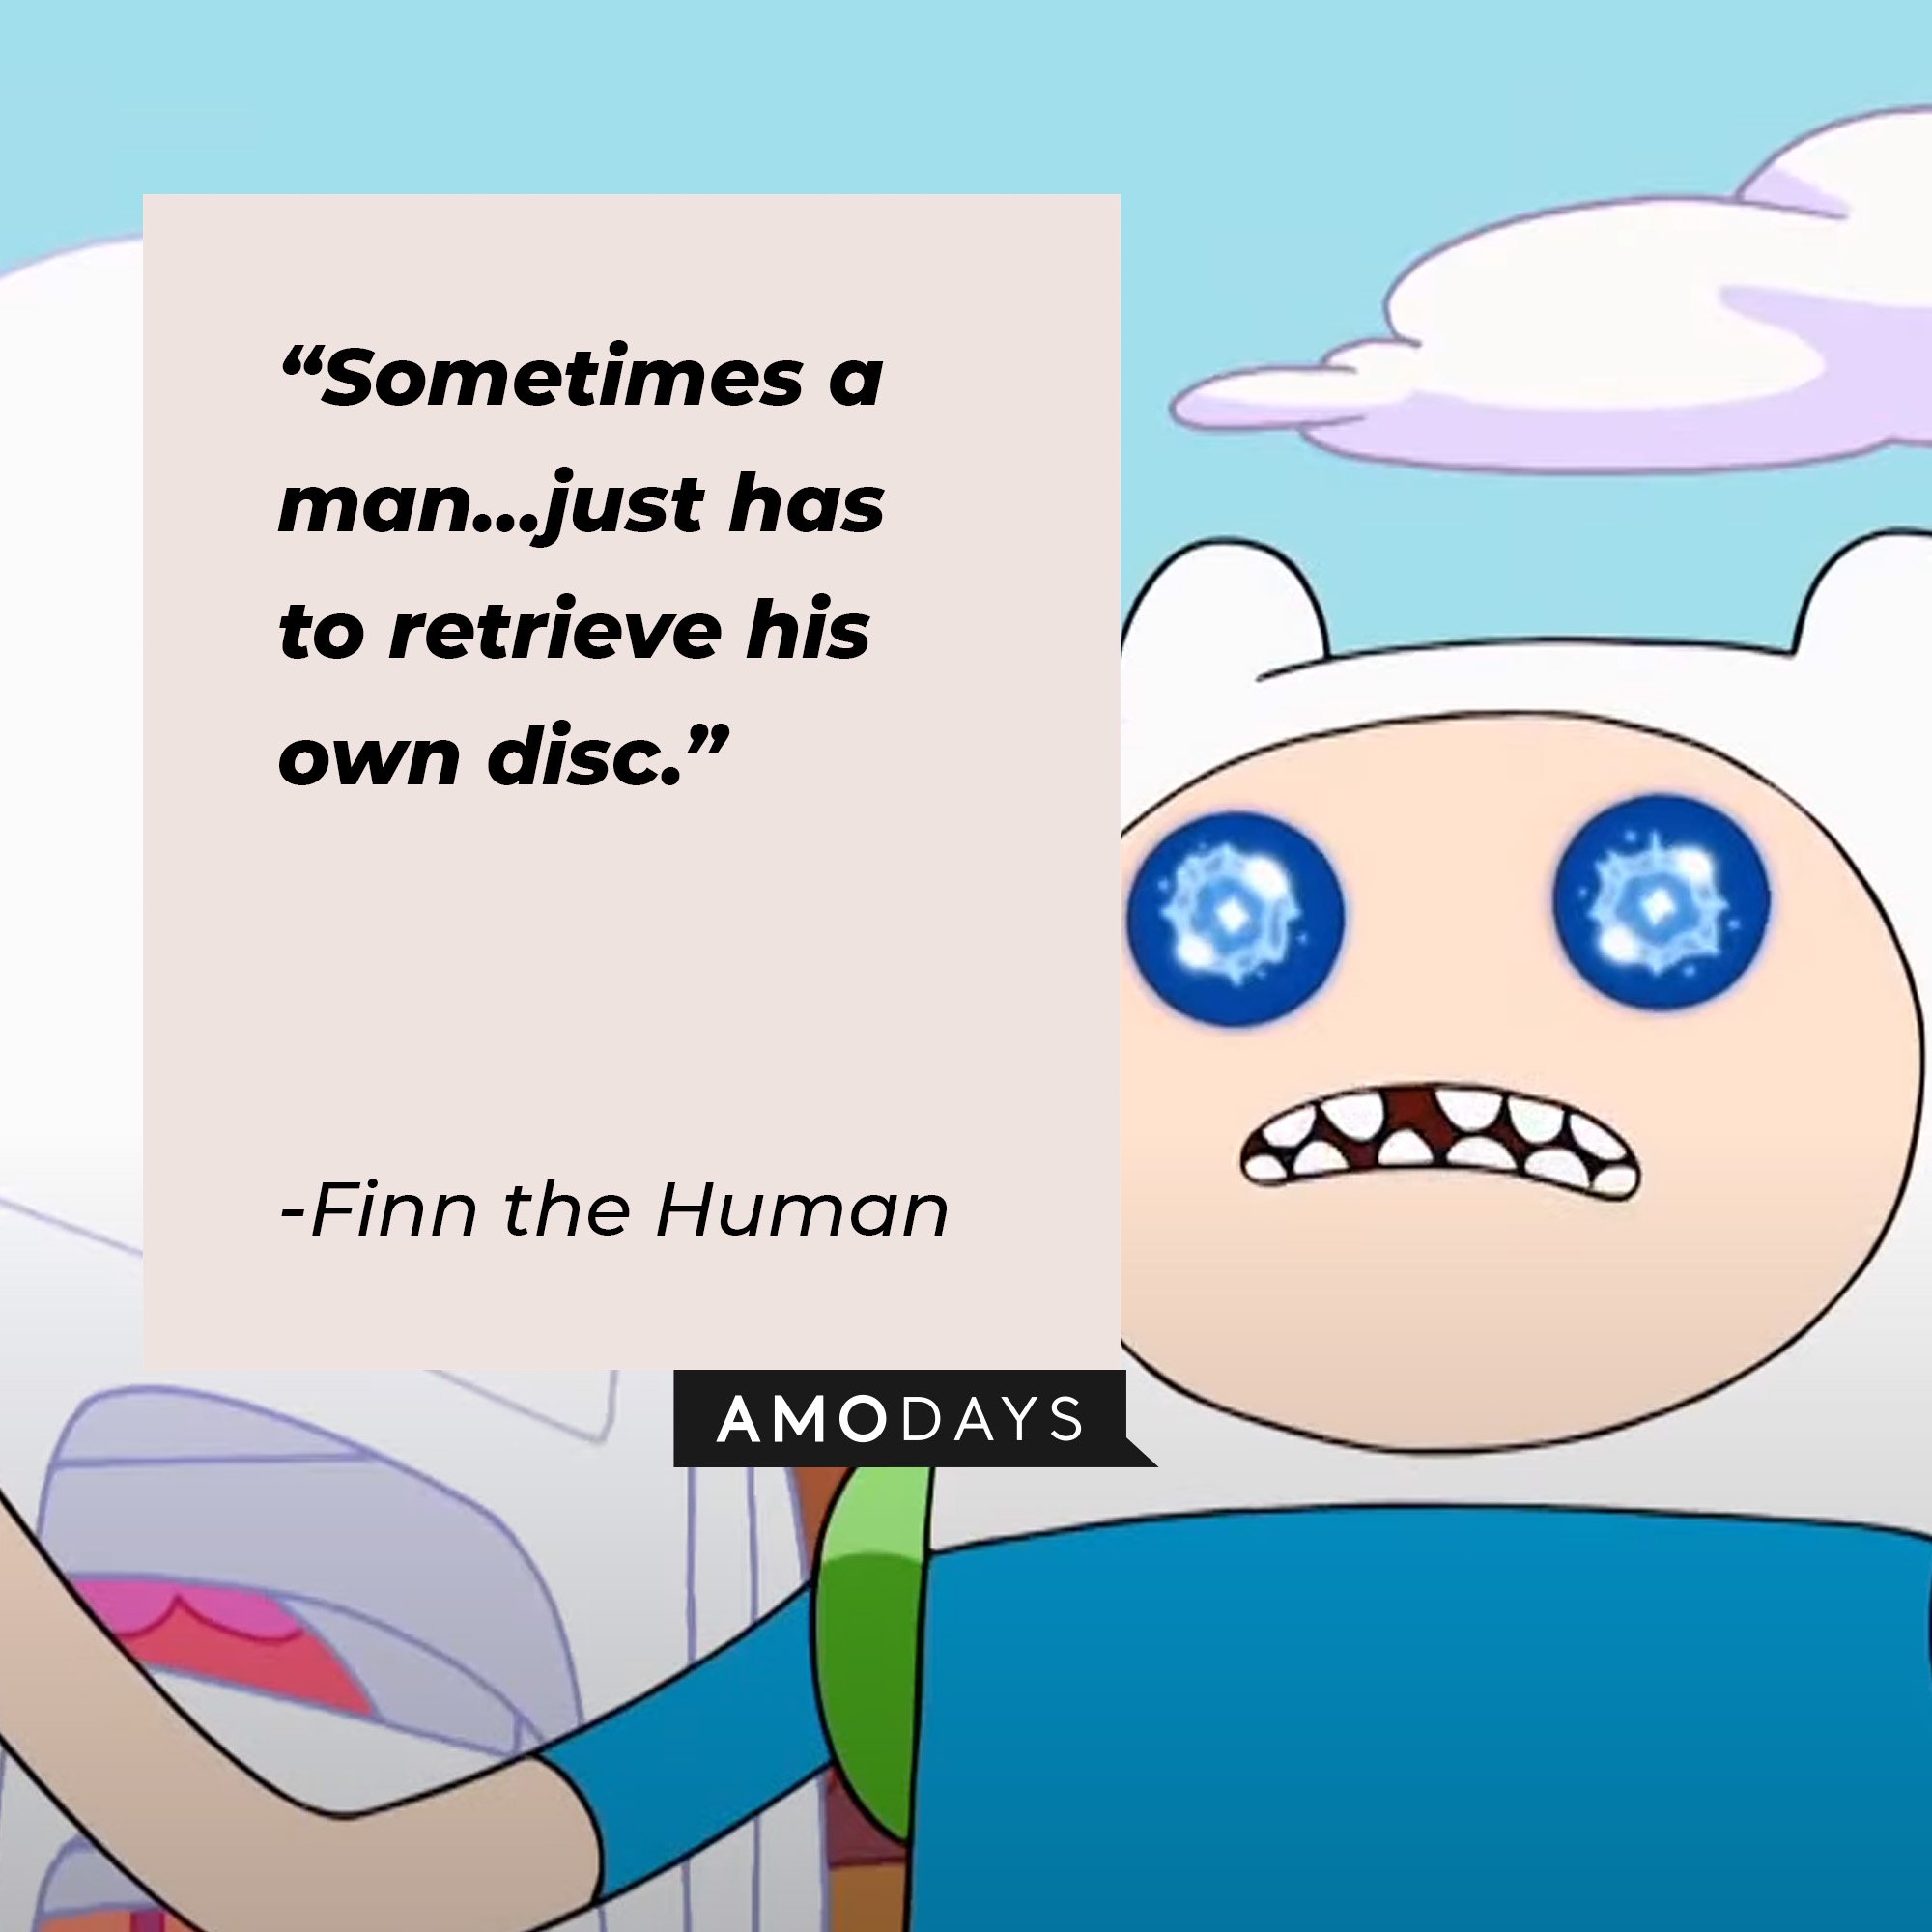 Finn the Human’s quote: “Sometimes a man…just has to retrieve his own disc.” | Image: AmoDays